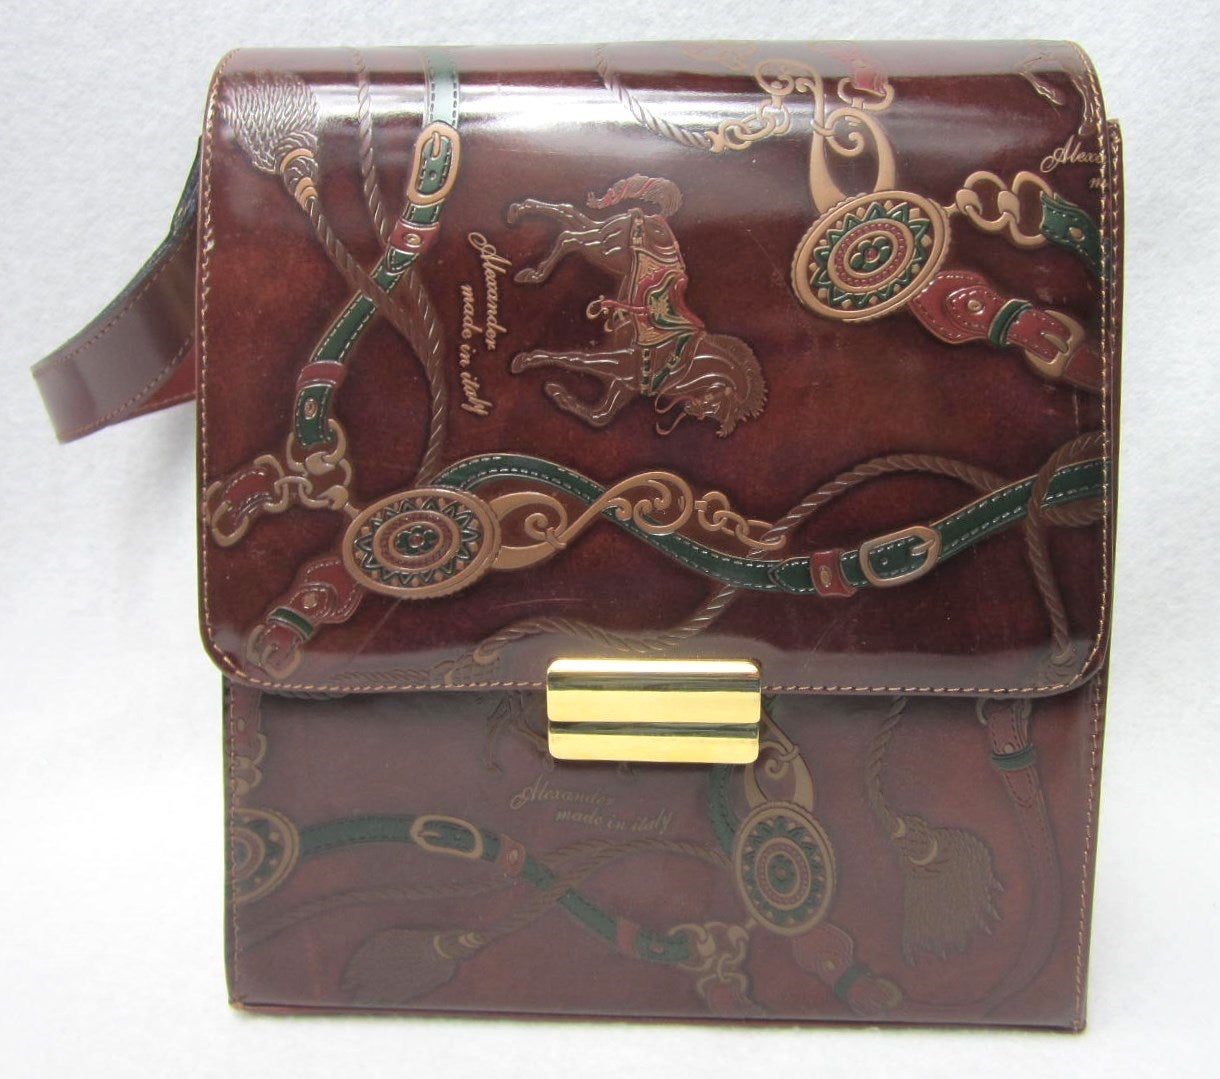 Stunning detailing on this Italian made handbag. Horse Motif. Luscious Brown Leather with Gold Tone Brass hardware and Footed. The Strap extends from 15 inches  long to 20 inches by opening the buckles on the side of the handbag. Measures- Wide 8